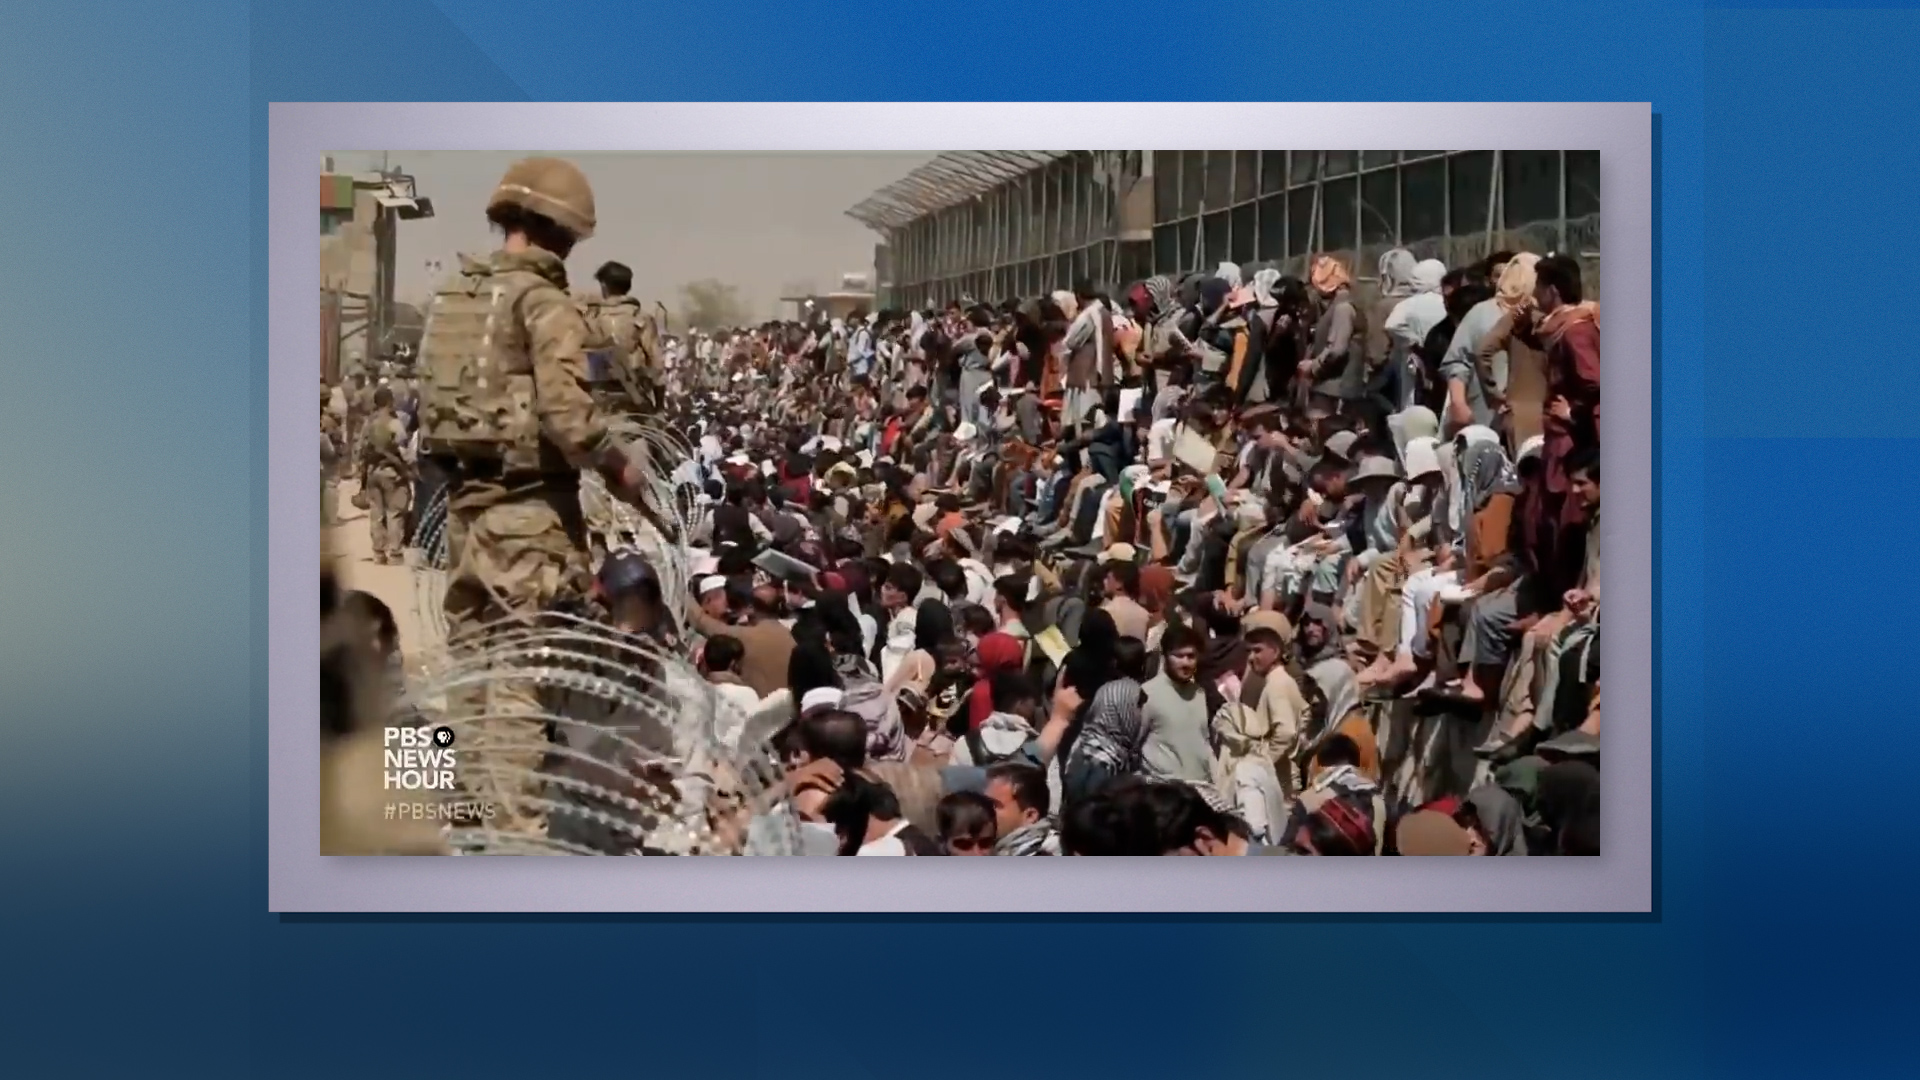 U.S. troops guard hundreds of Afghans seated and standing behind razor wire